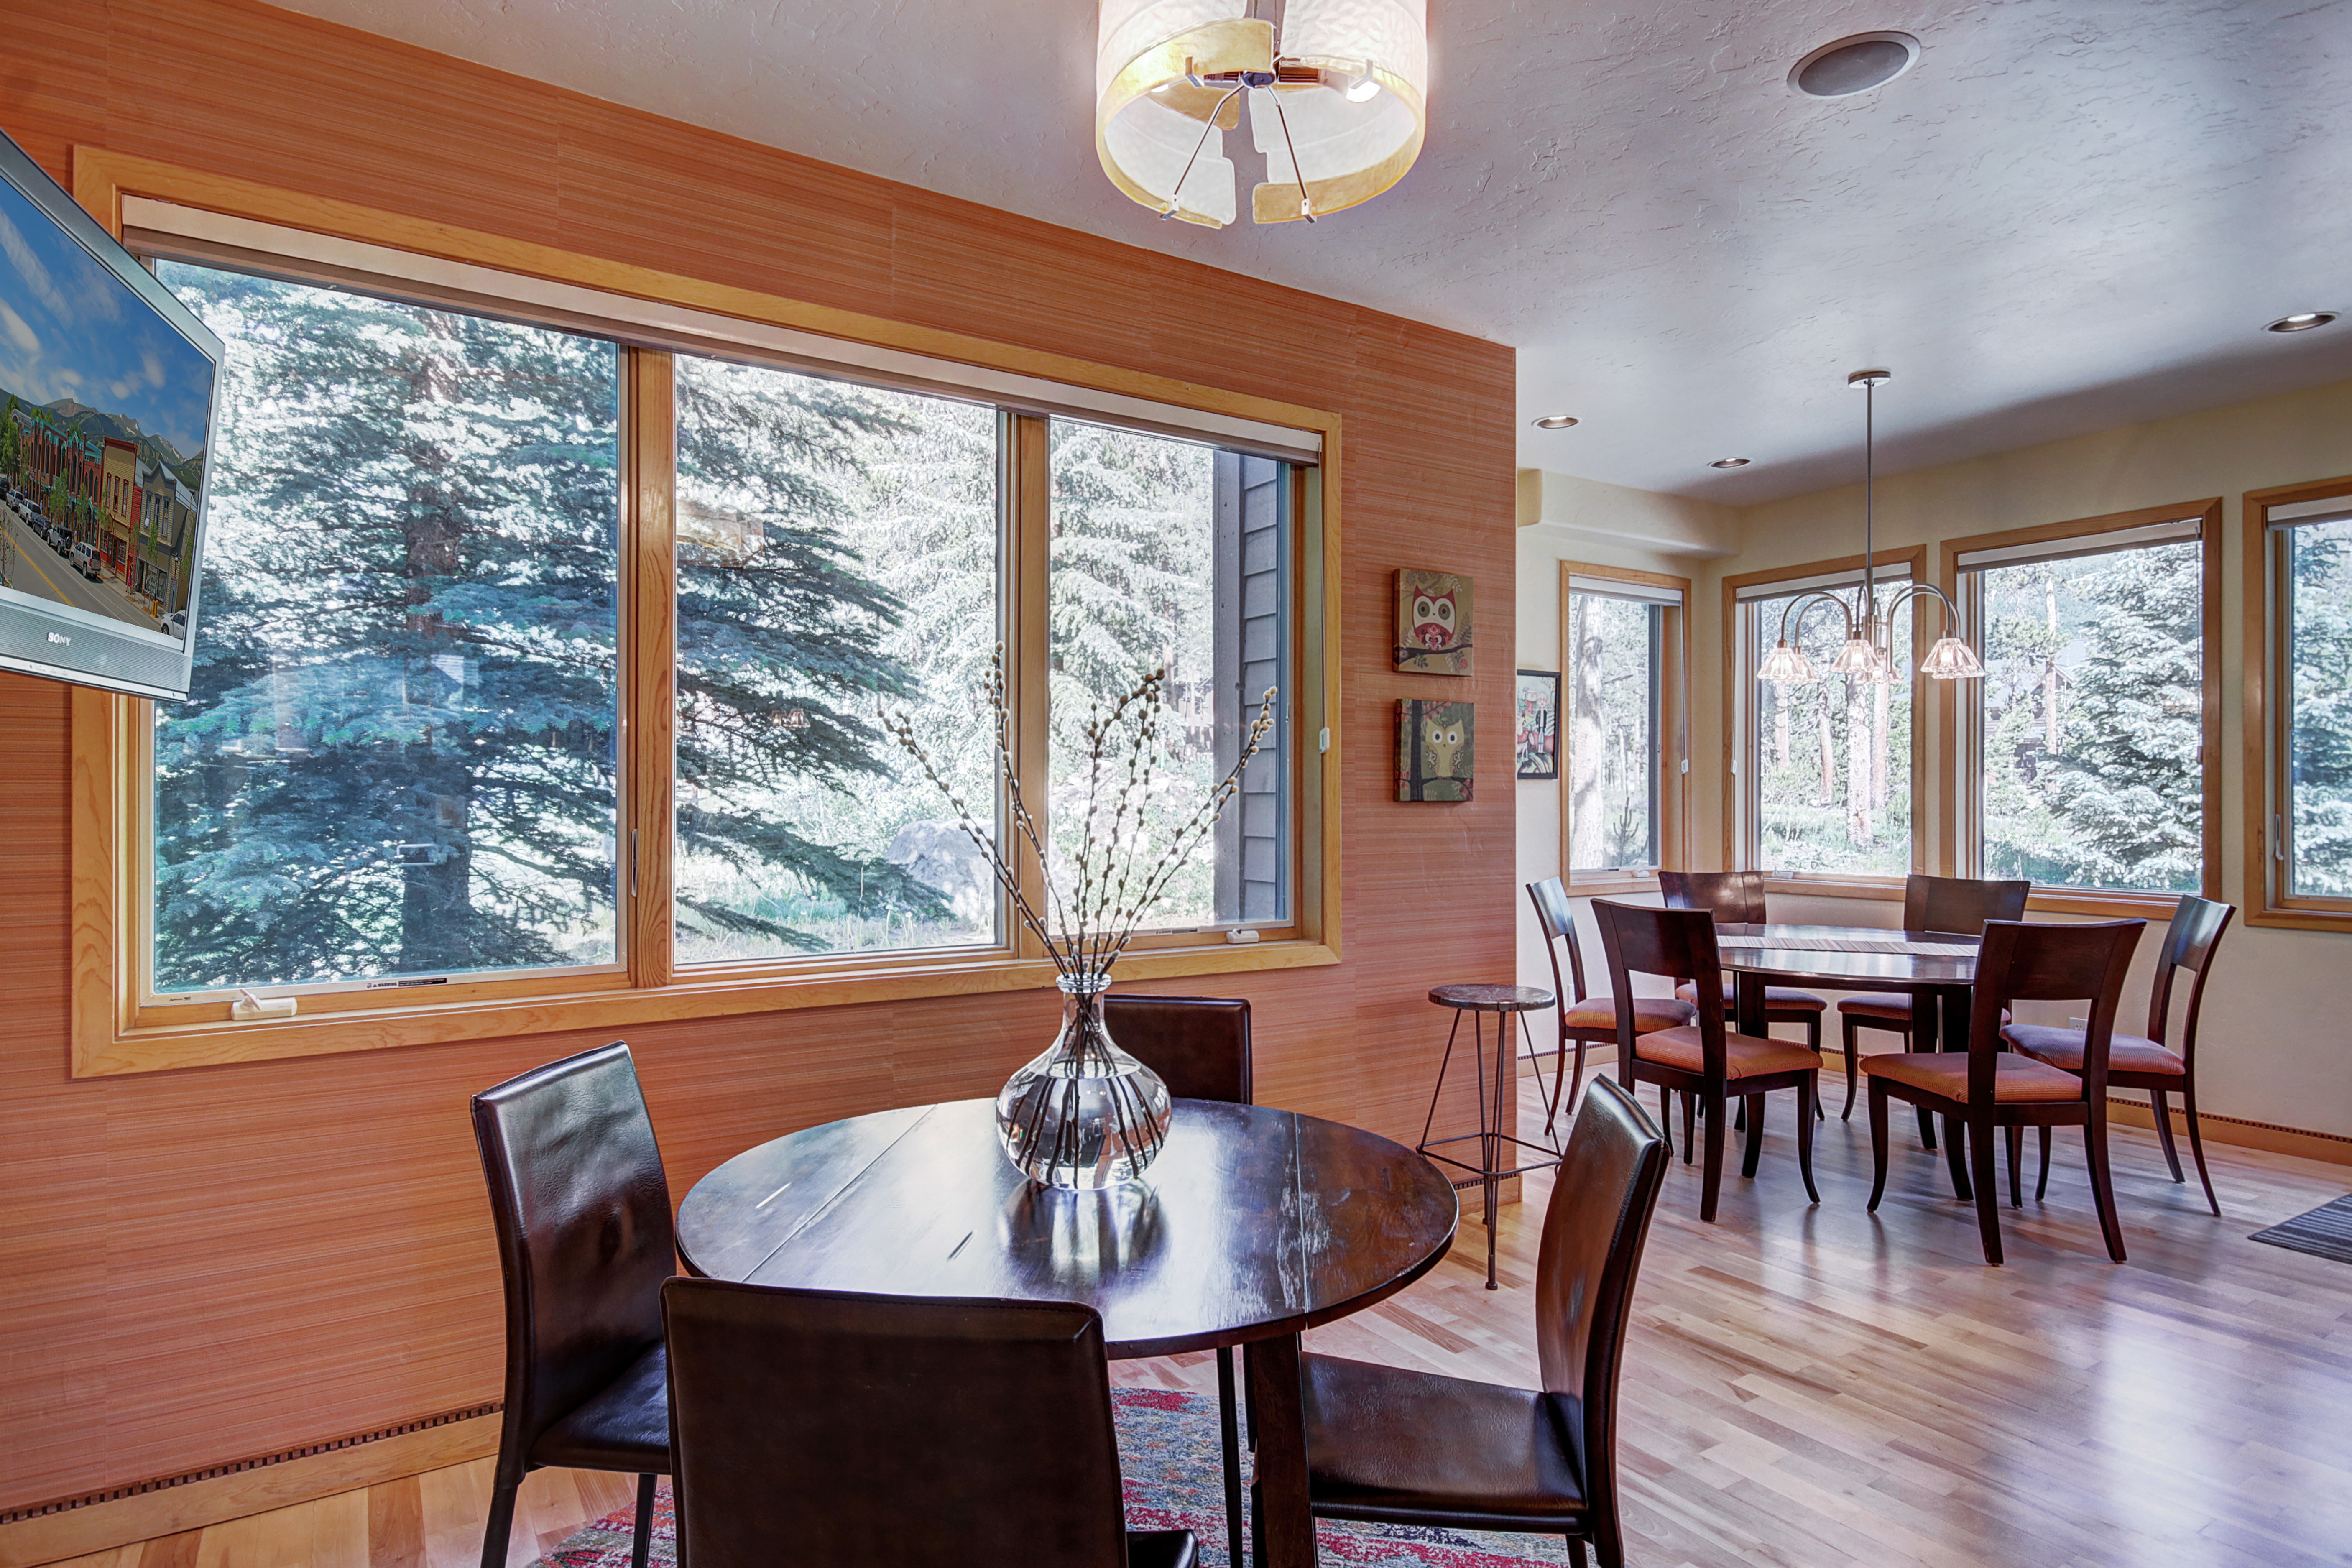 Seating for 6 at the dining room table and 4 in the breakfast nook. - Buffalo Mountain Vista Frisco Vacation Rental